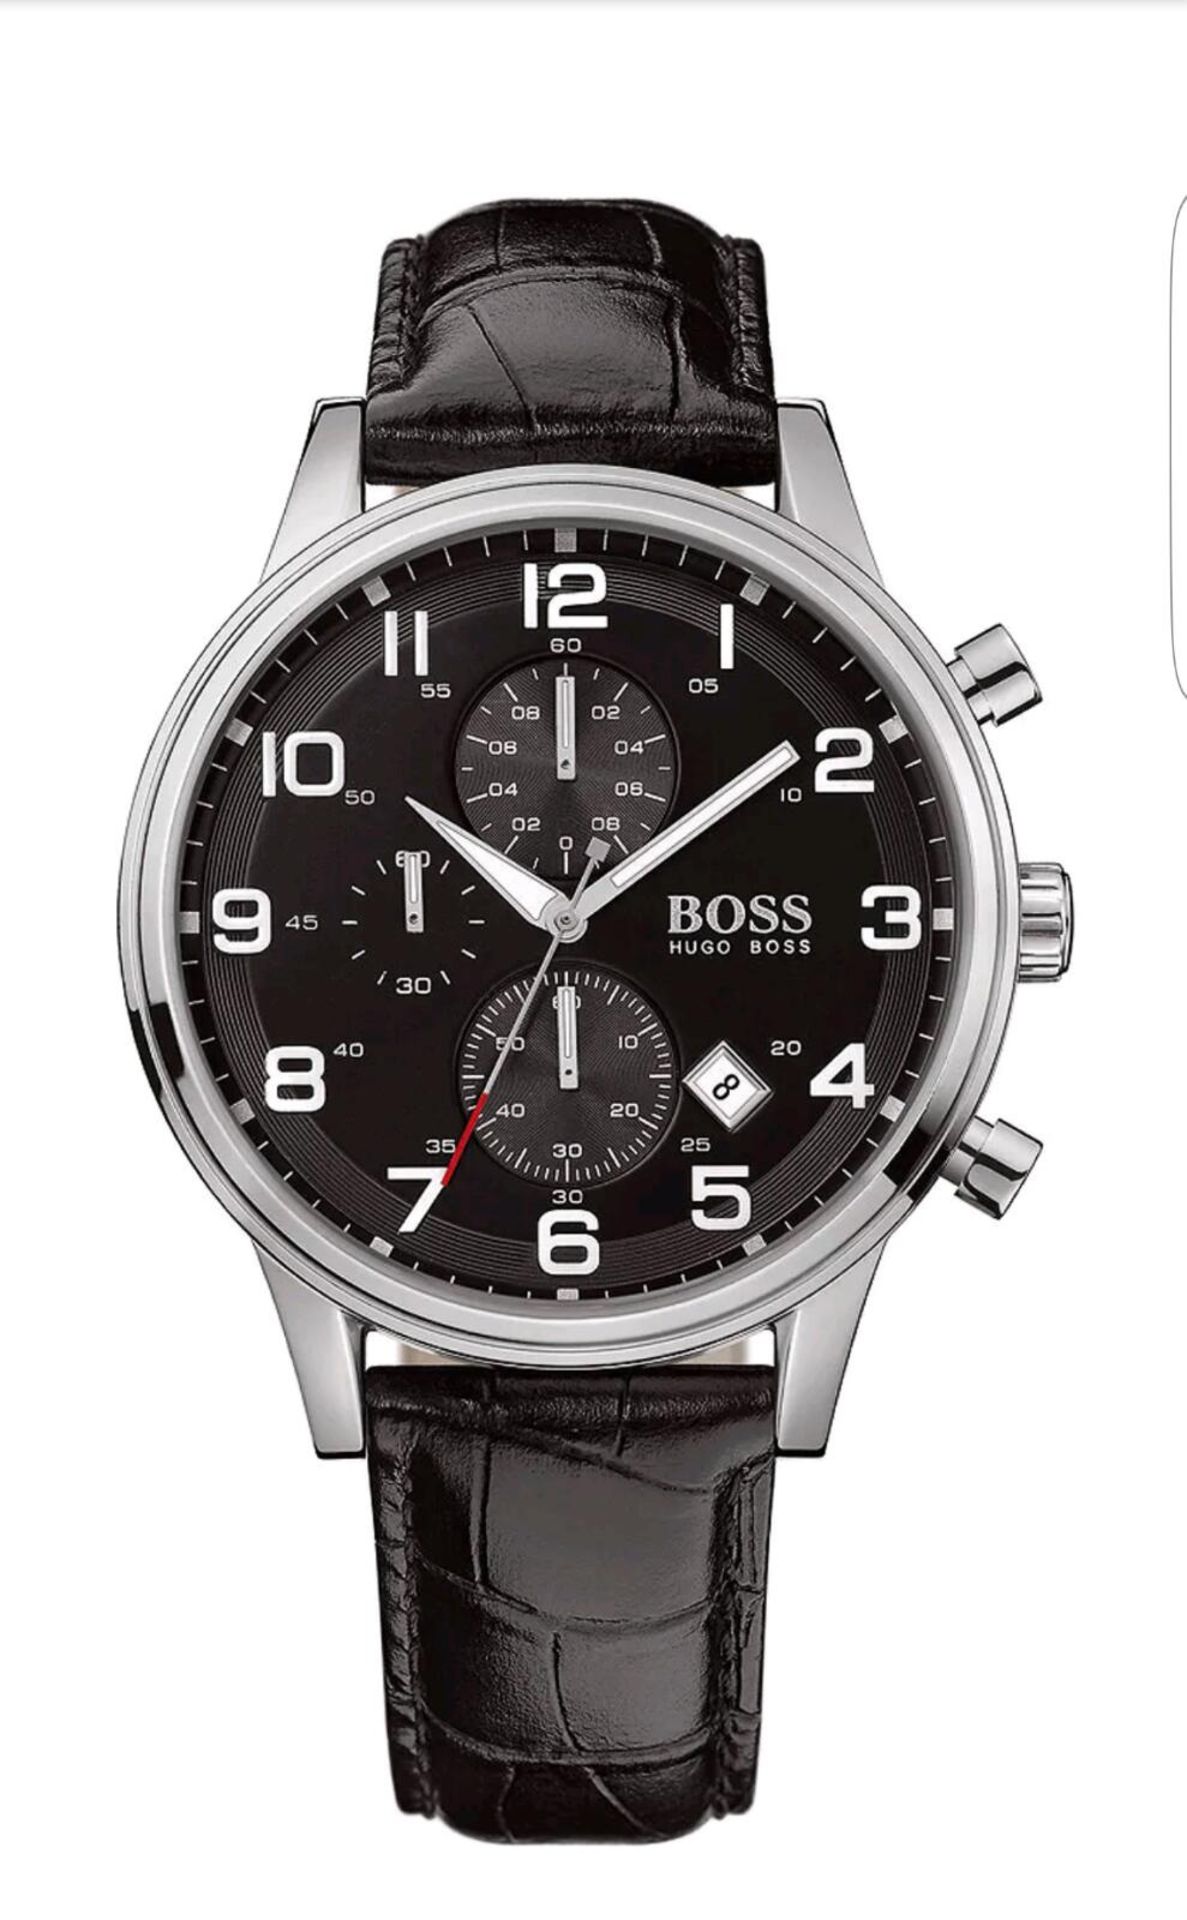 BRAND NEW GENTS HUGO BOSS WATCH 1512448, COMPLETE WITH ORIGINAL BOX AND MANUAL